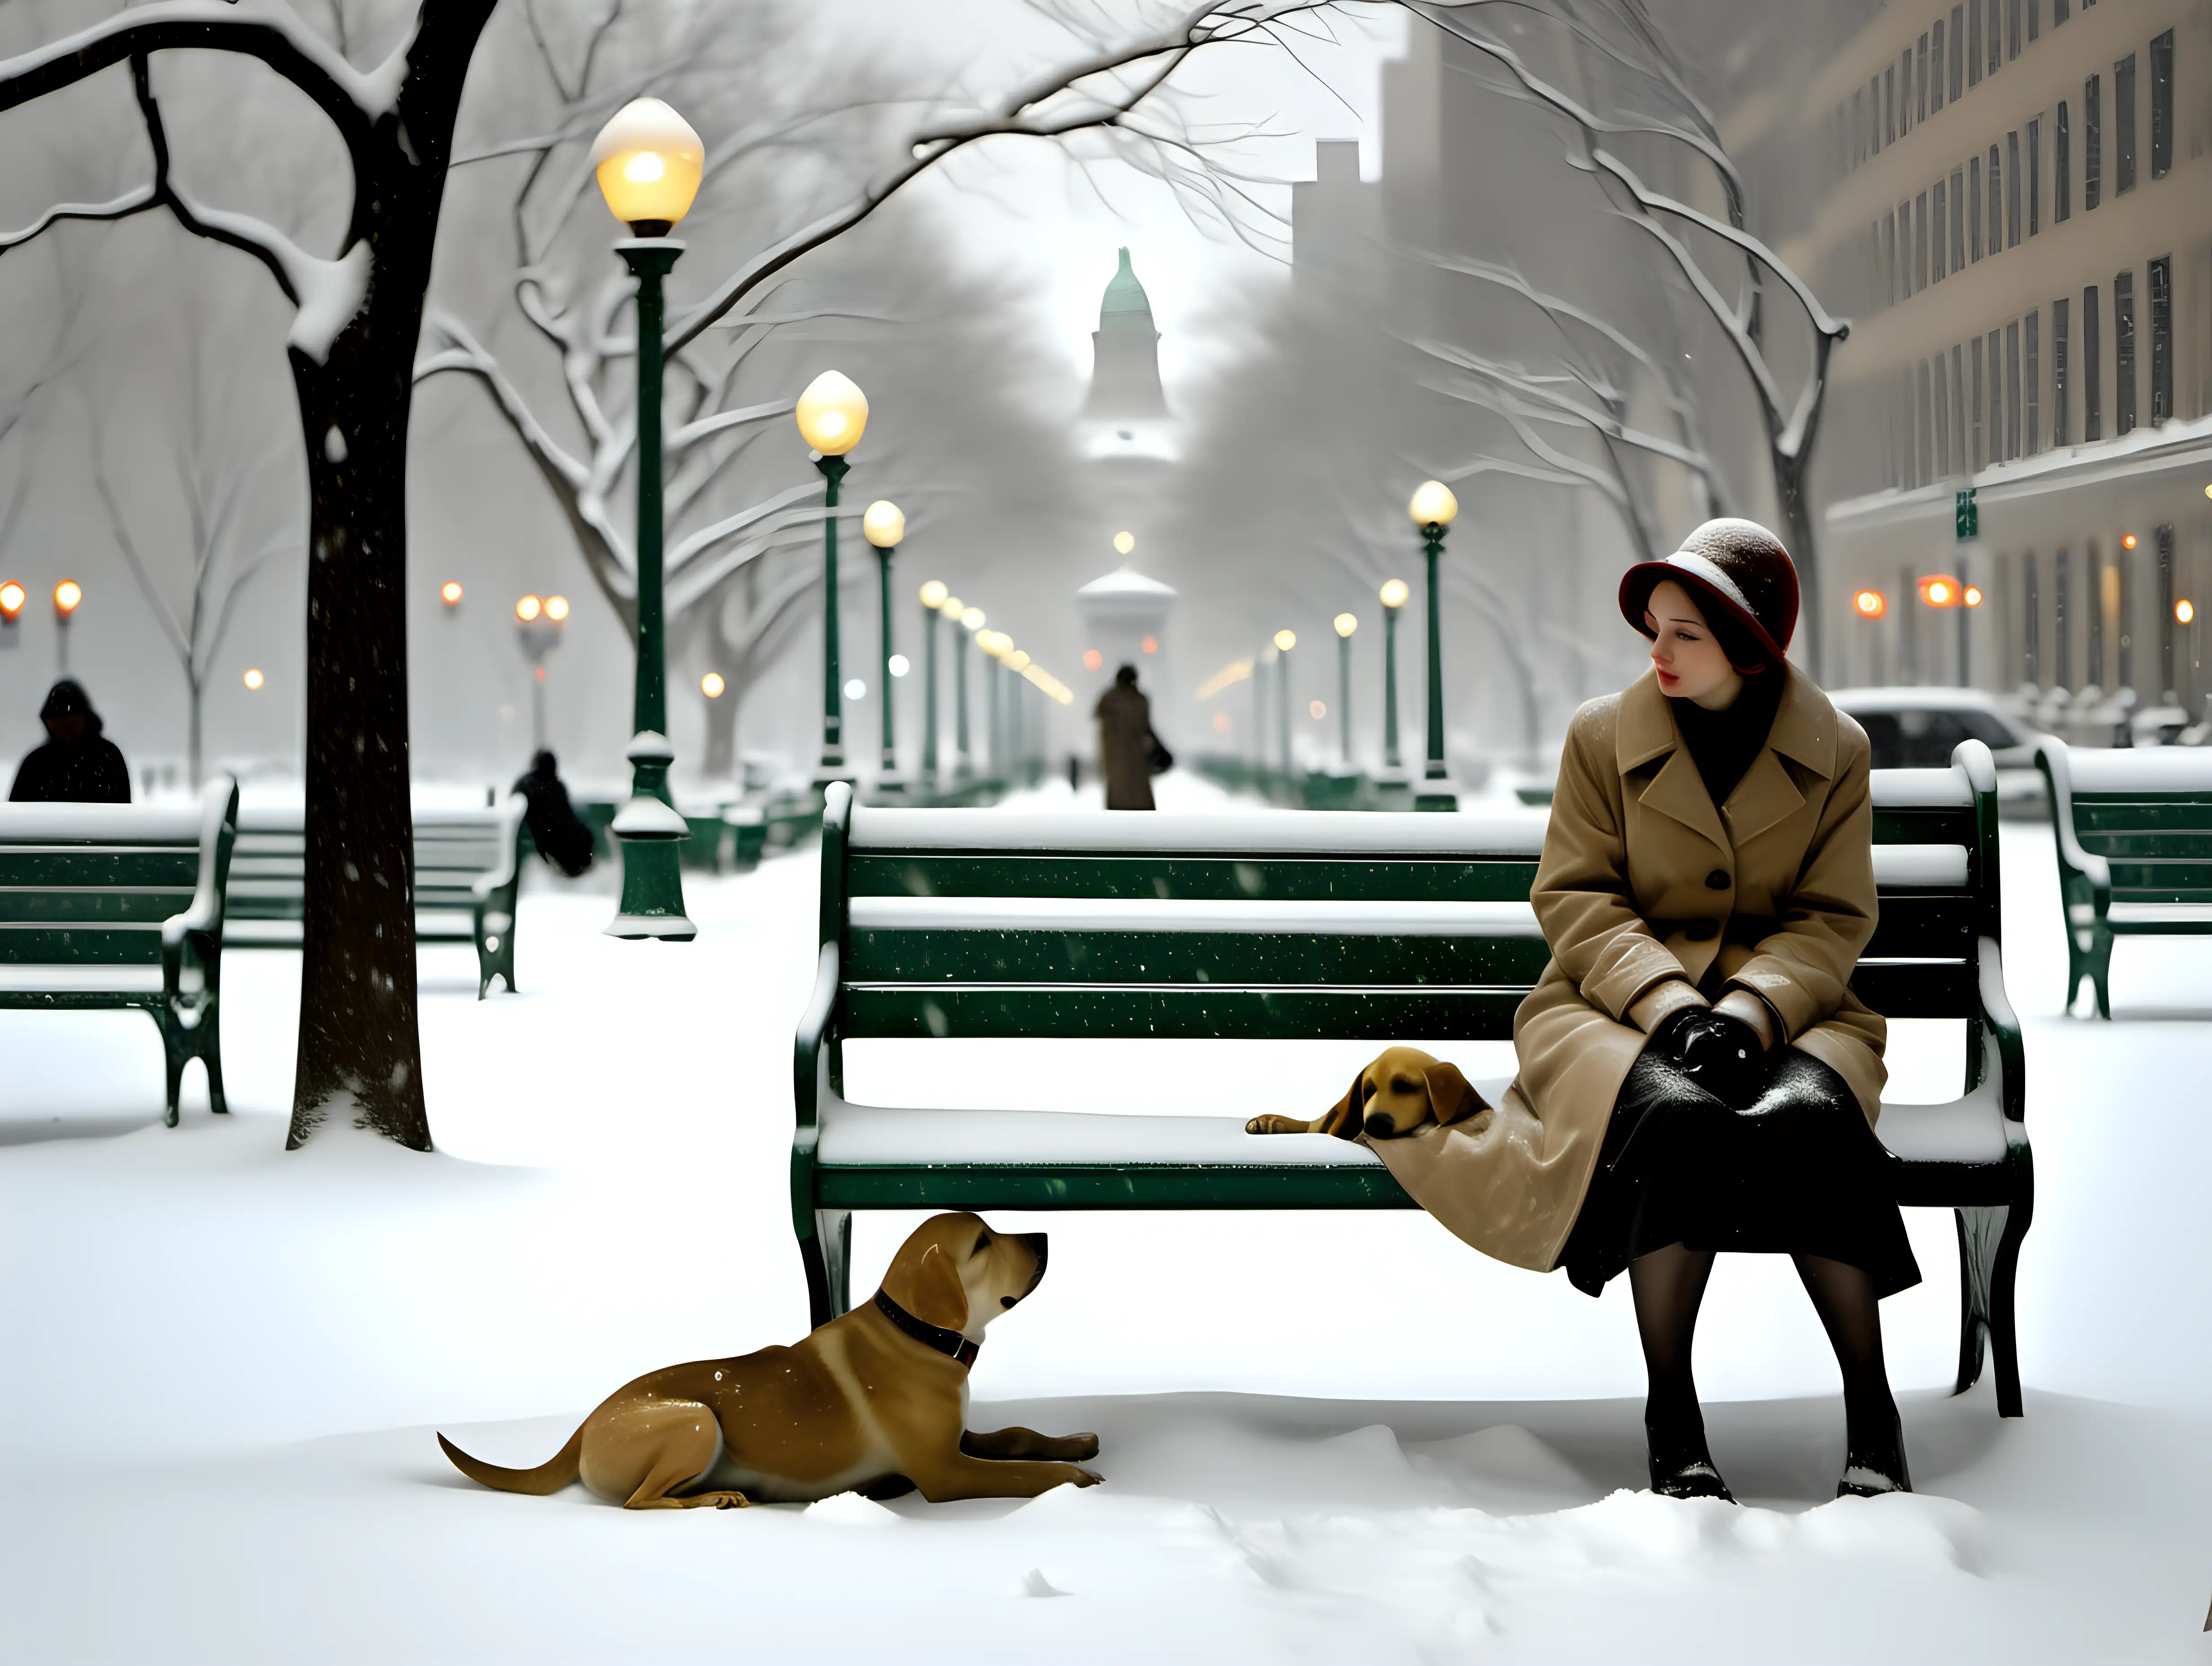 Woman on a park bench with a puppy in a snow storm in front of the NYC library Edward Hopper style